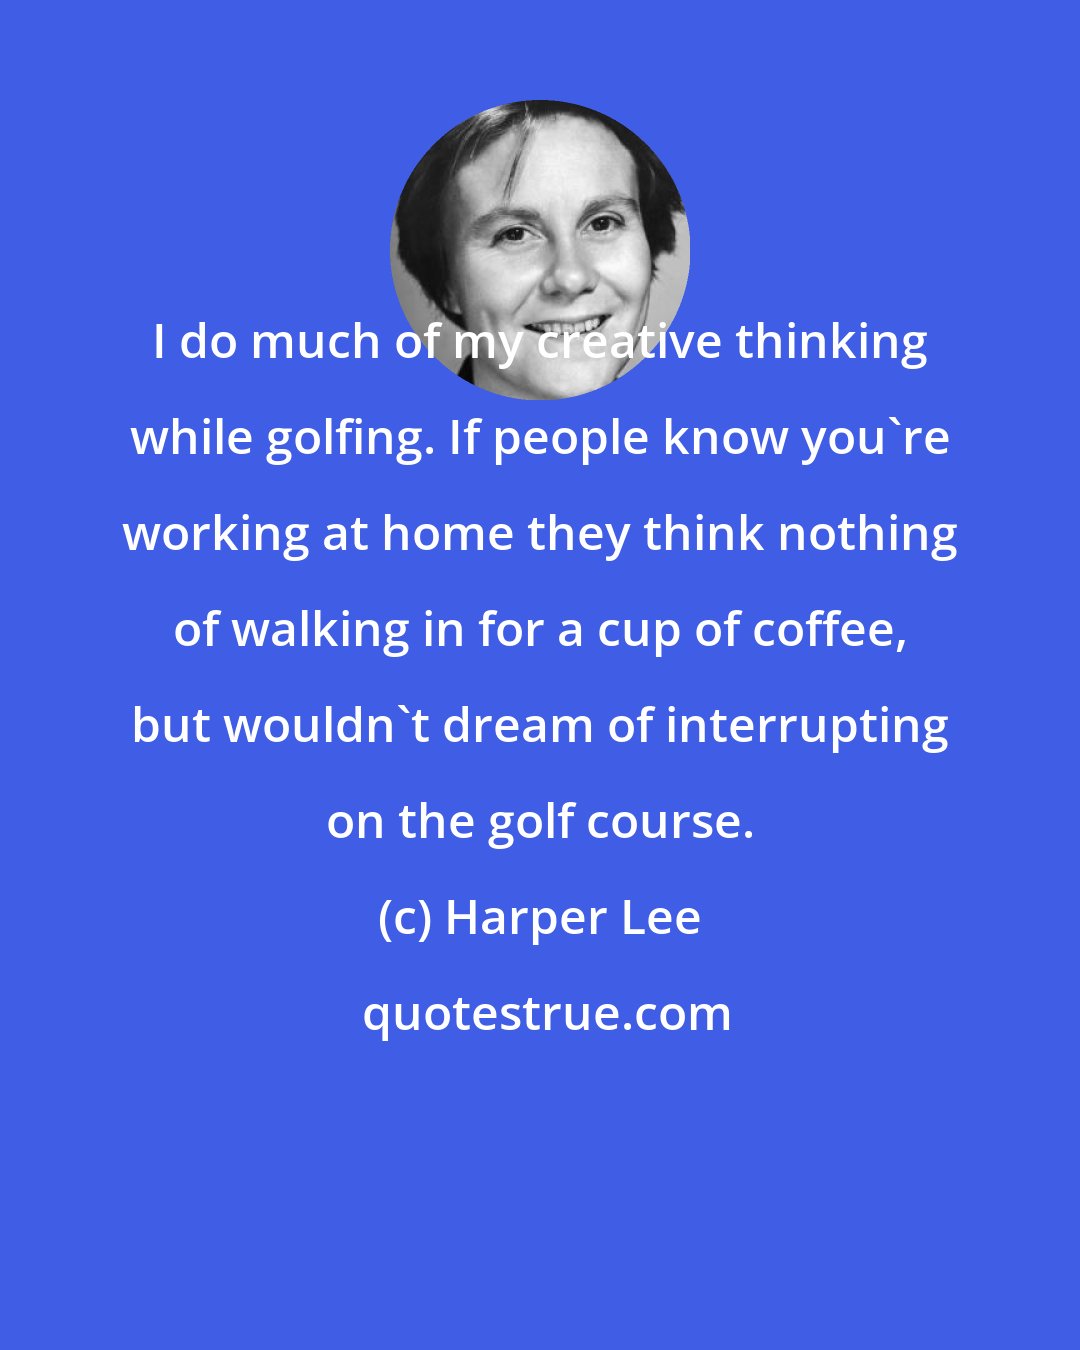 Harper Lee: I do much of my creative thinking while golfing. If people know you're working at home they think nothing of walking in for a cup of coffee, but wouldn't dream of interrupting on the golf course.